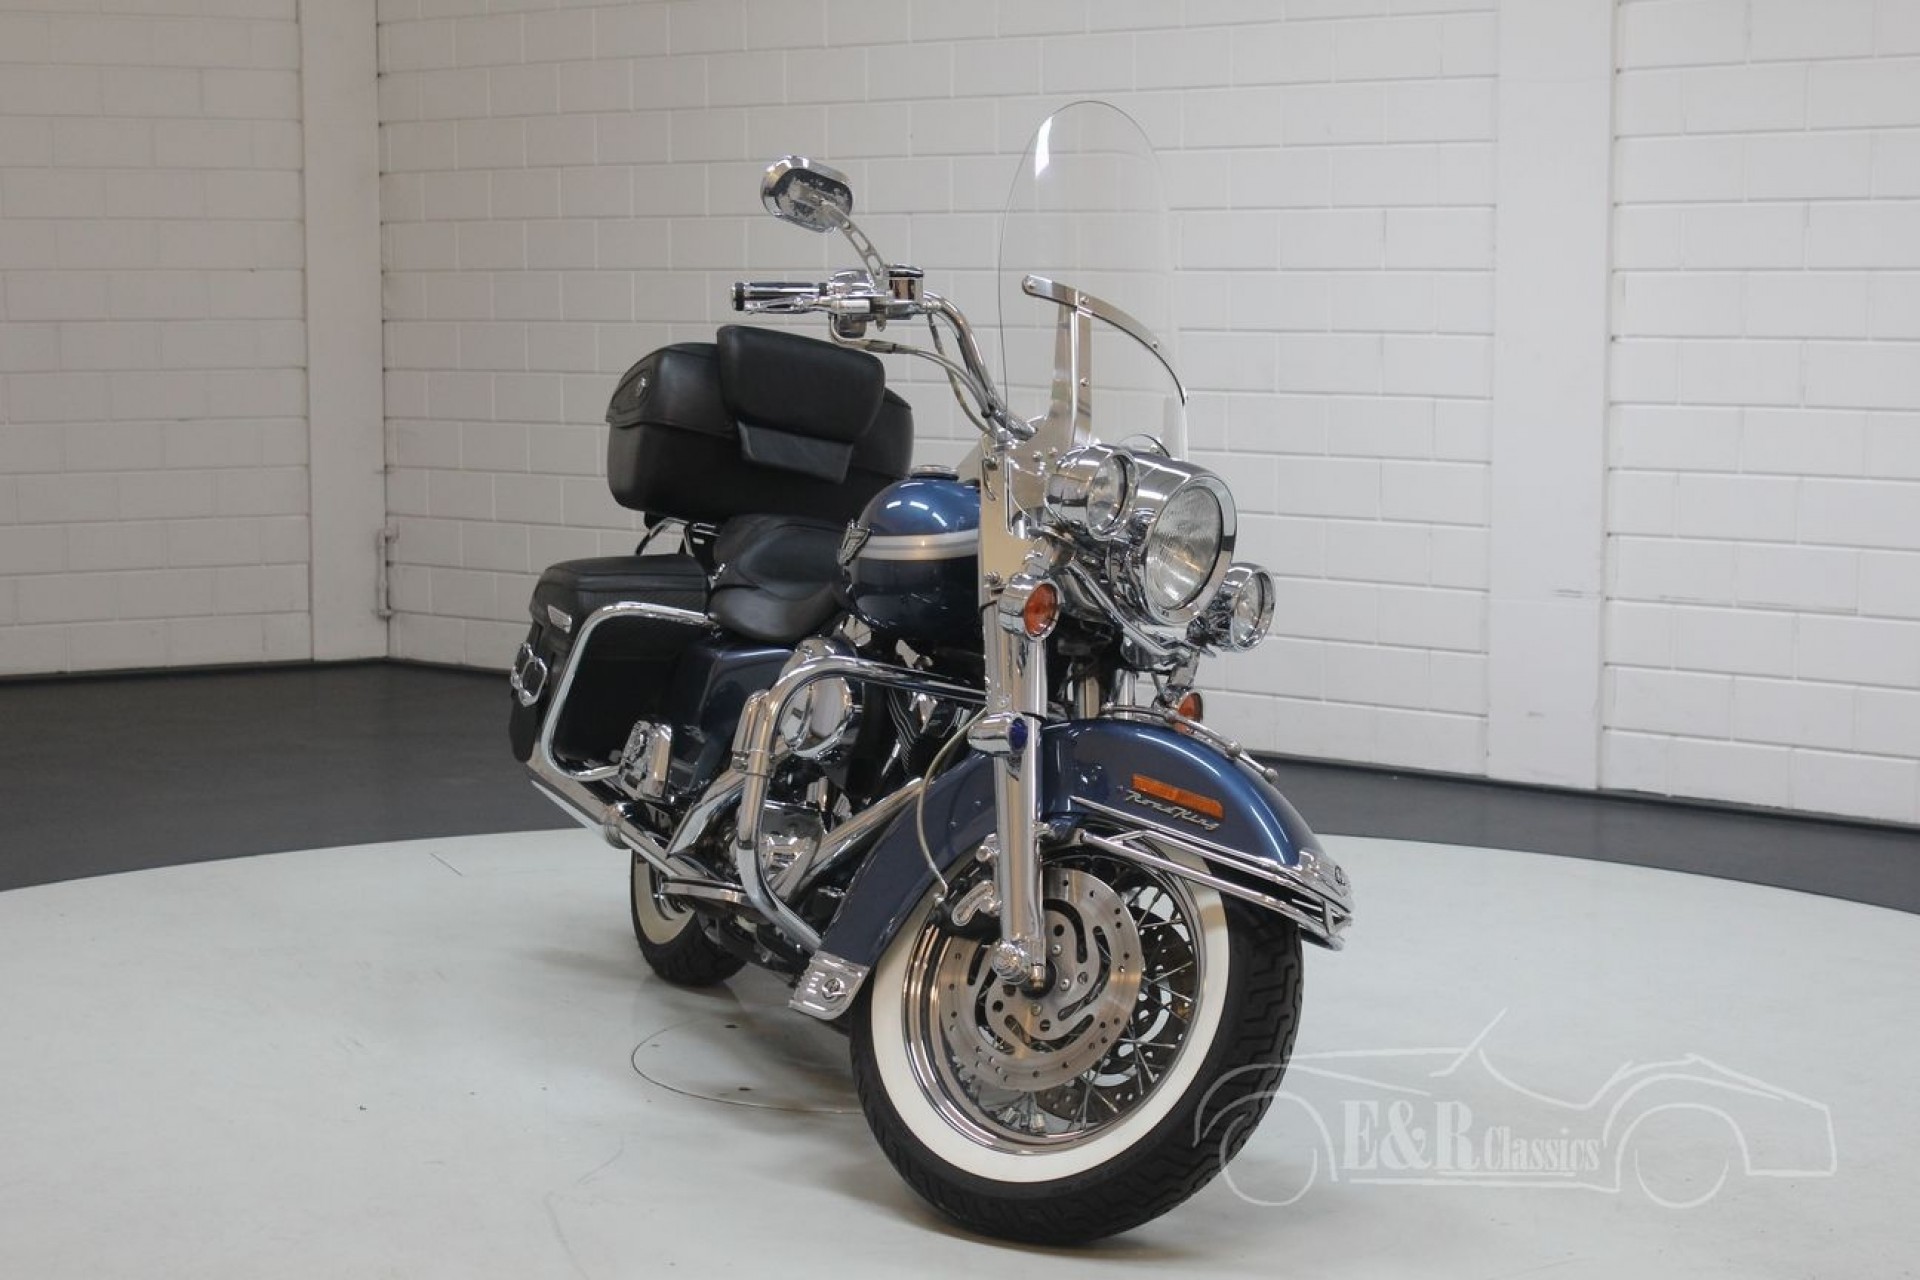 Harley Davidson Road King Classic For Sale At Erclassics